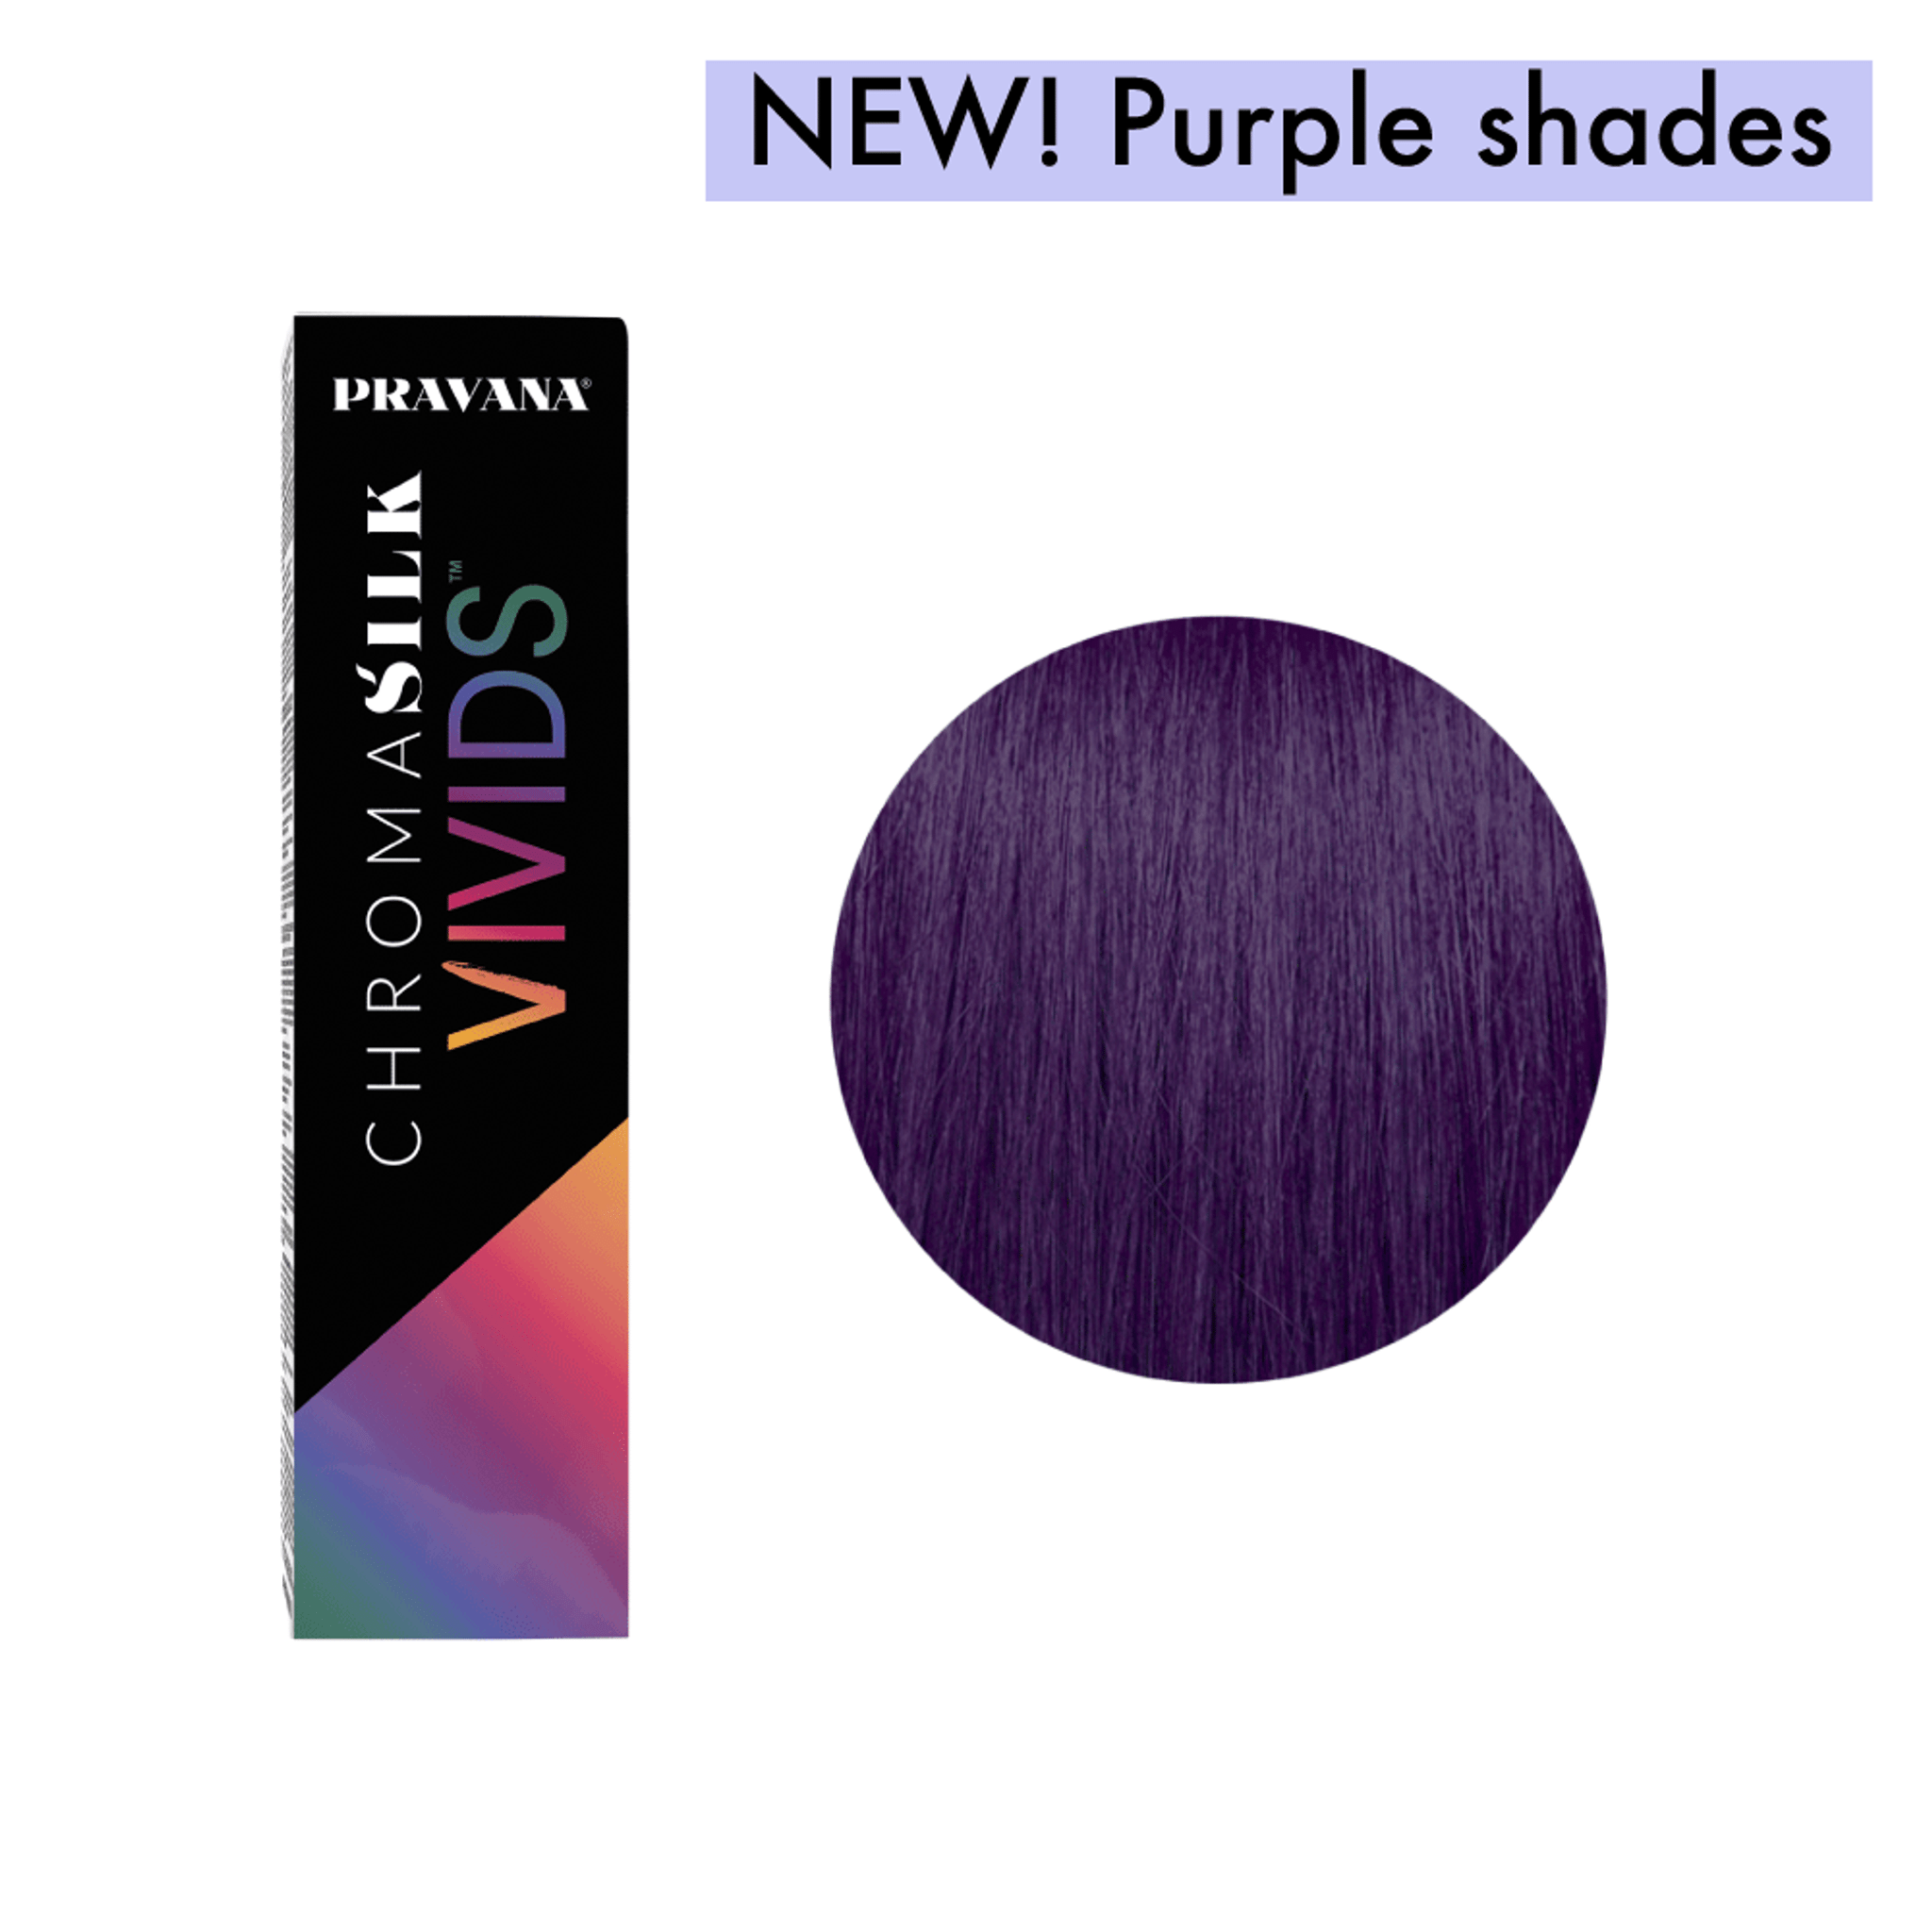 Discover Pravana's new digital purple Vivids shades. 
Pravana's new cooler-toned purple VIVIDS shade allows for endless customisation and unlimited colour possibilities.

The ChromaSilk VIVIDS collection is a semi-permanent, non-oxidative hair colour that is designed to be used without developer.